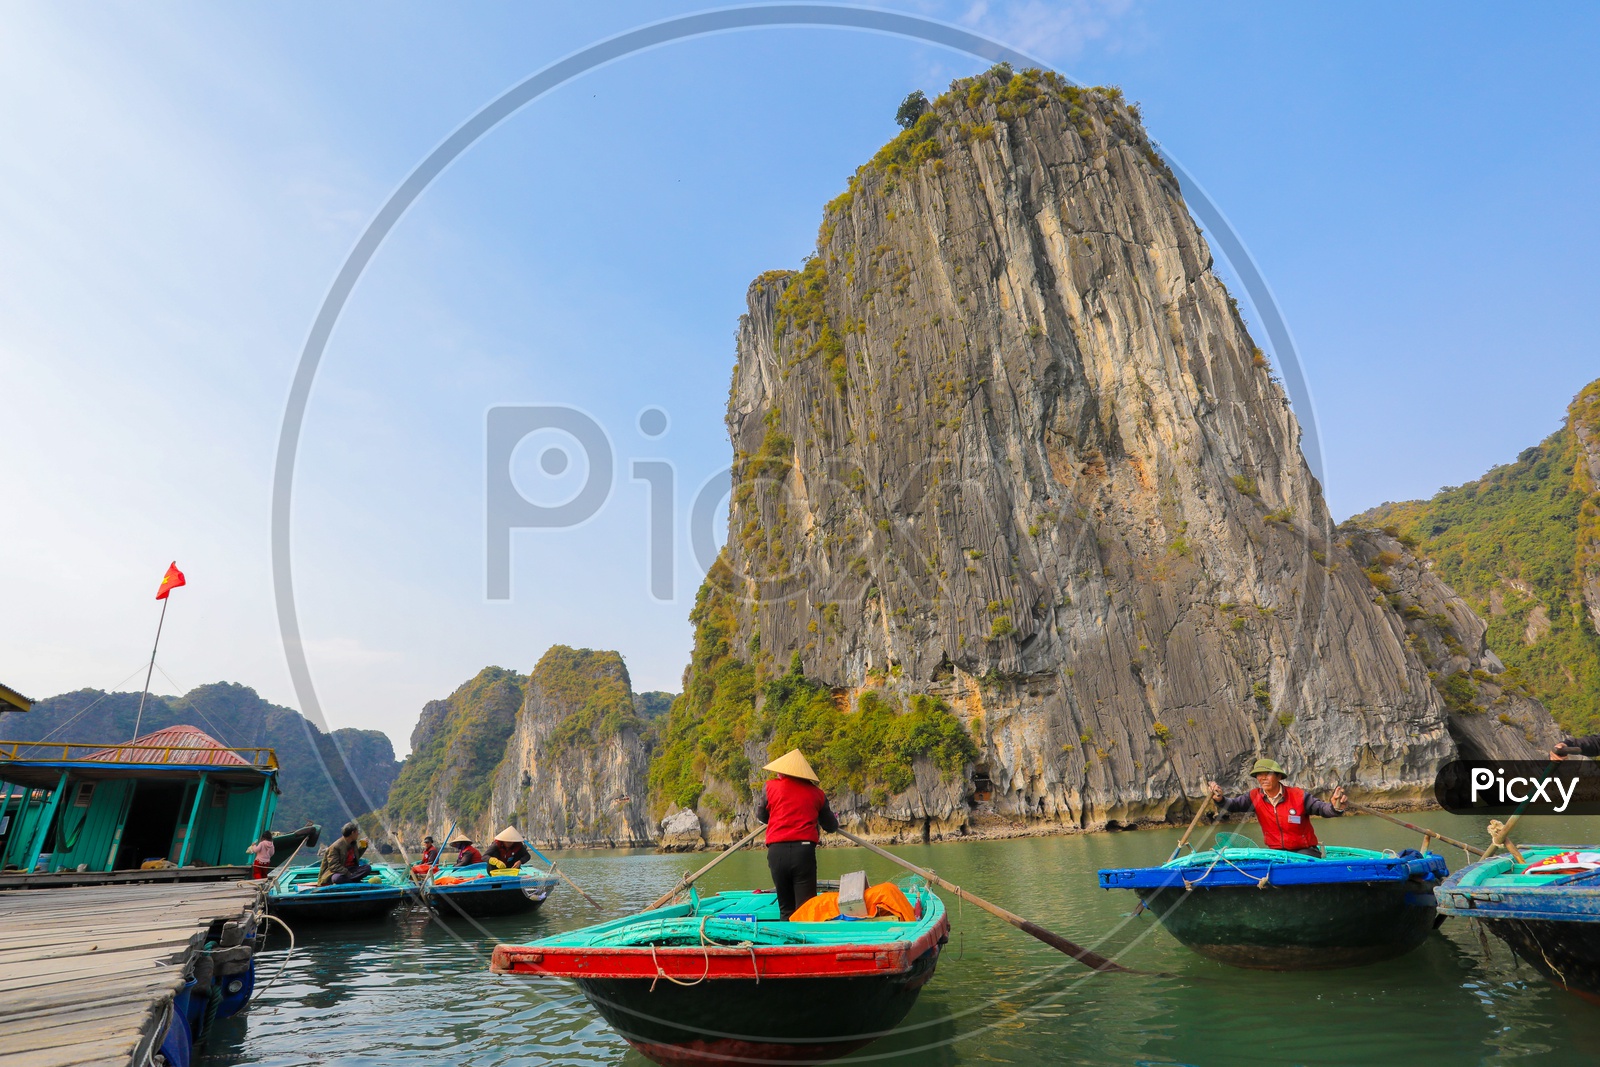 Rowers waiting for tourist passengers on Bamboo Boat at Halong Bay, Vietnam.